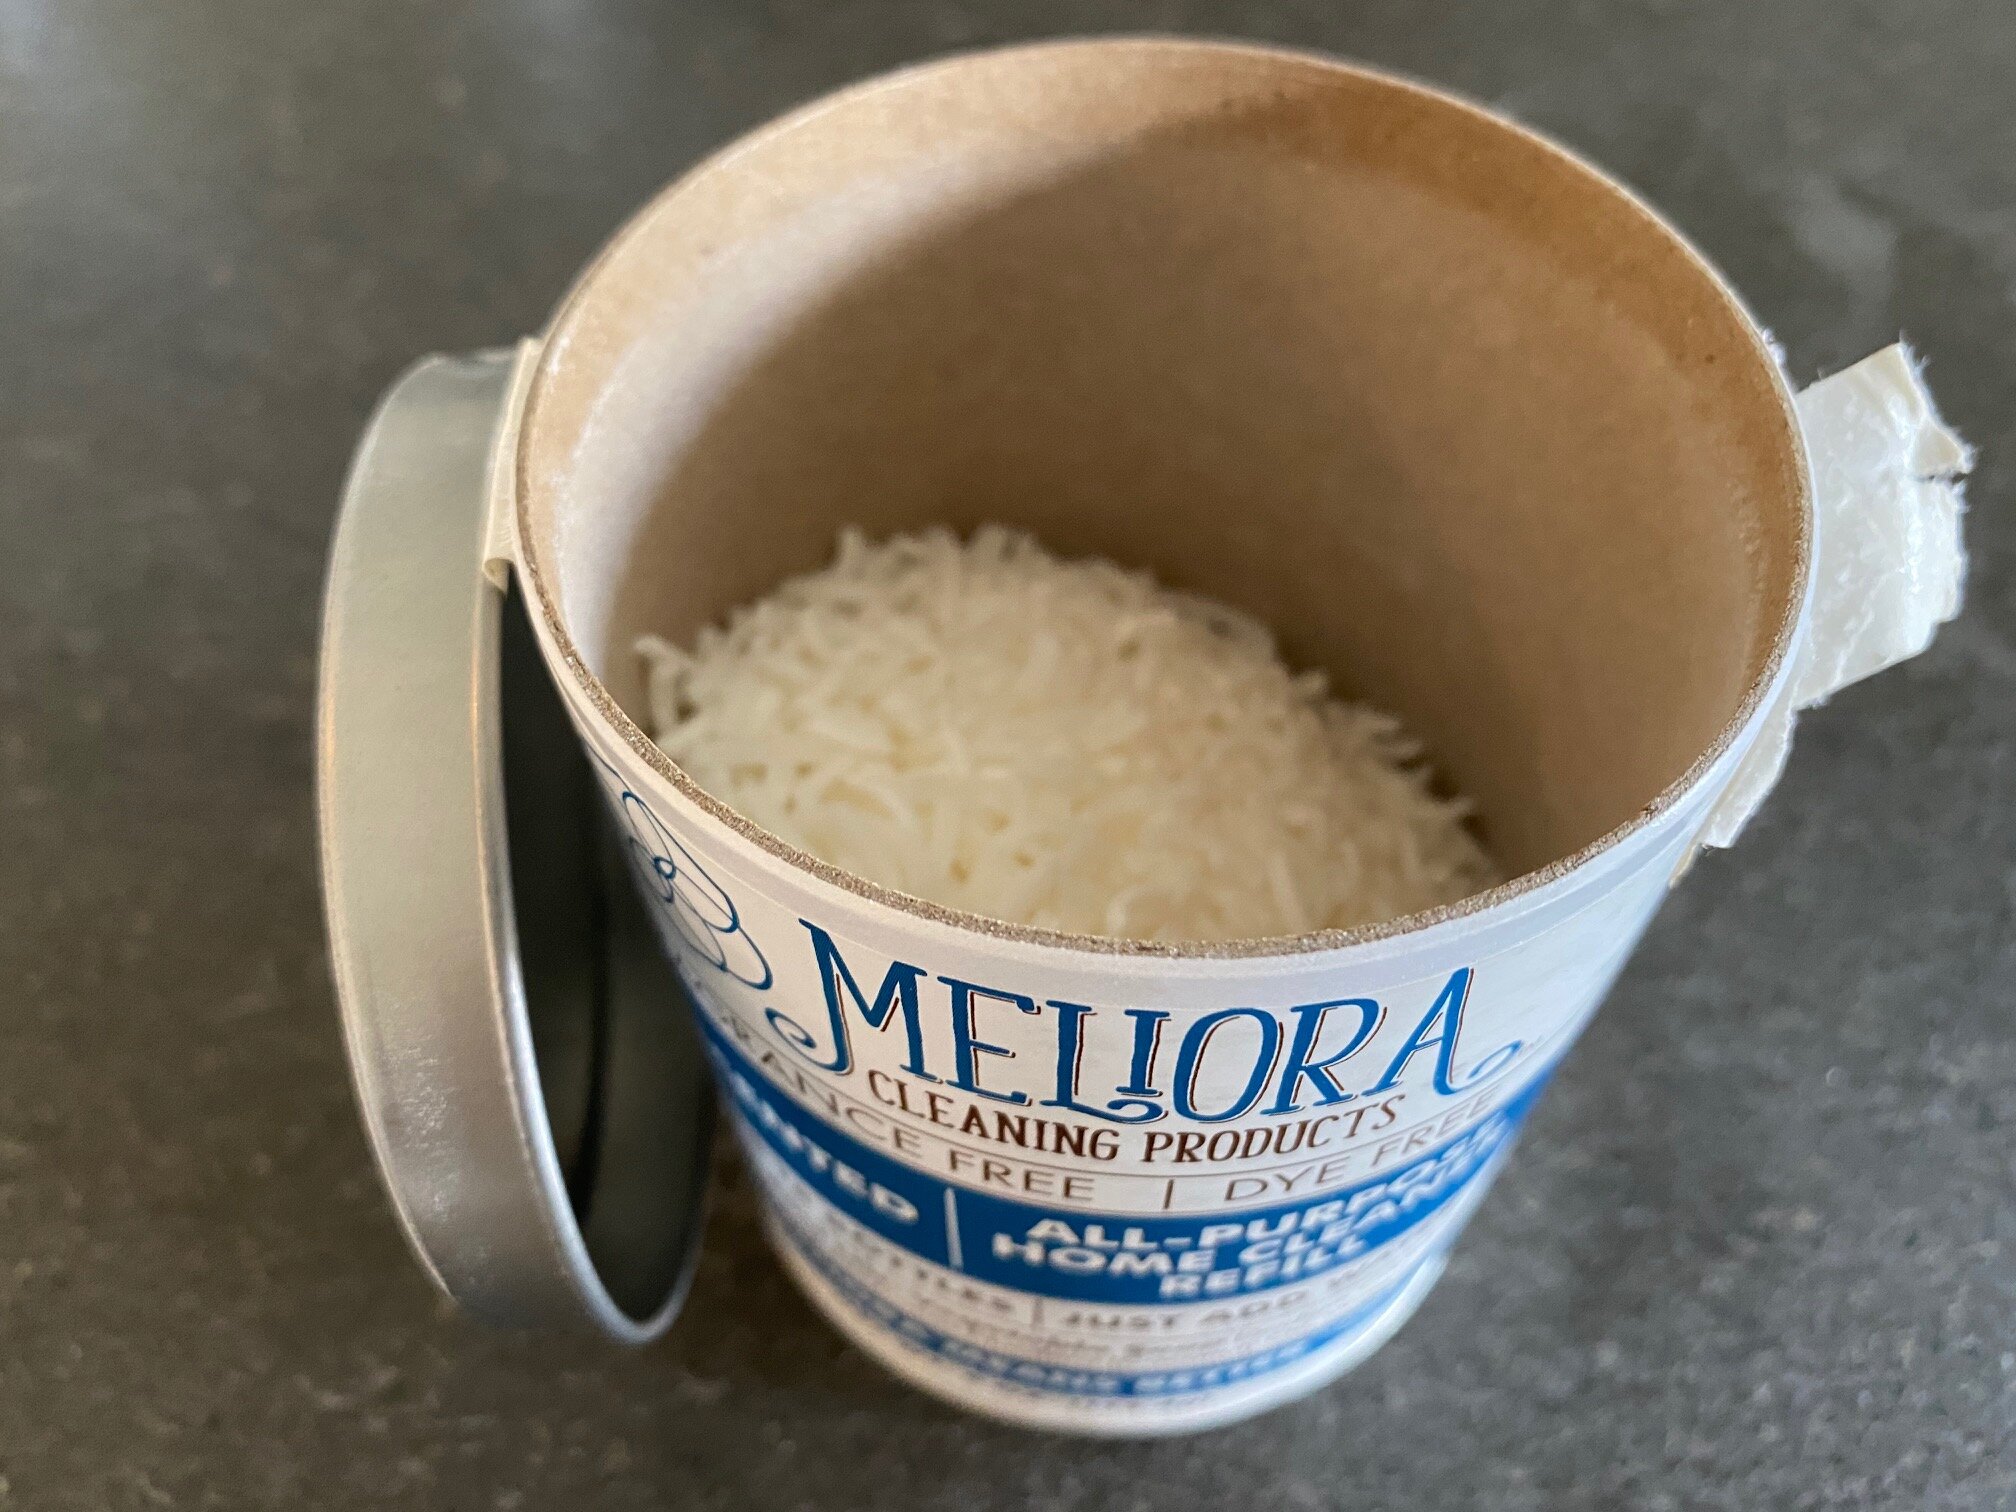 Meliora All Purpose Home Cleaner Refill